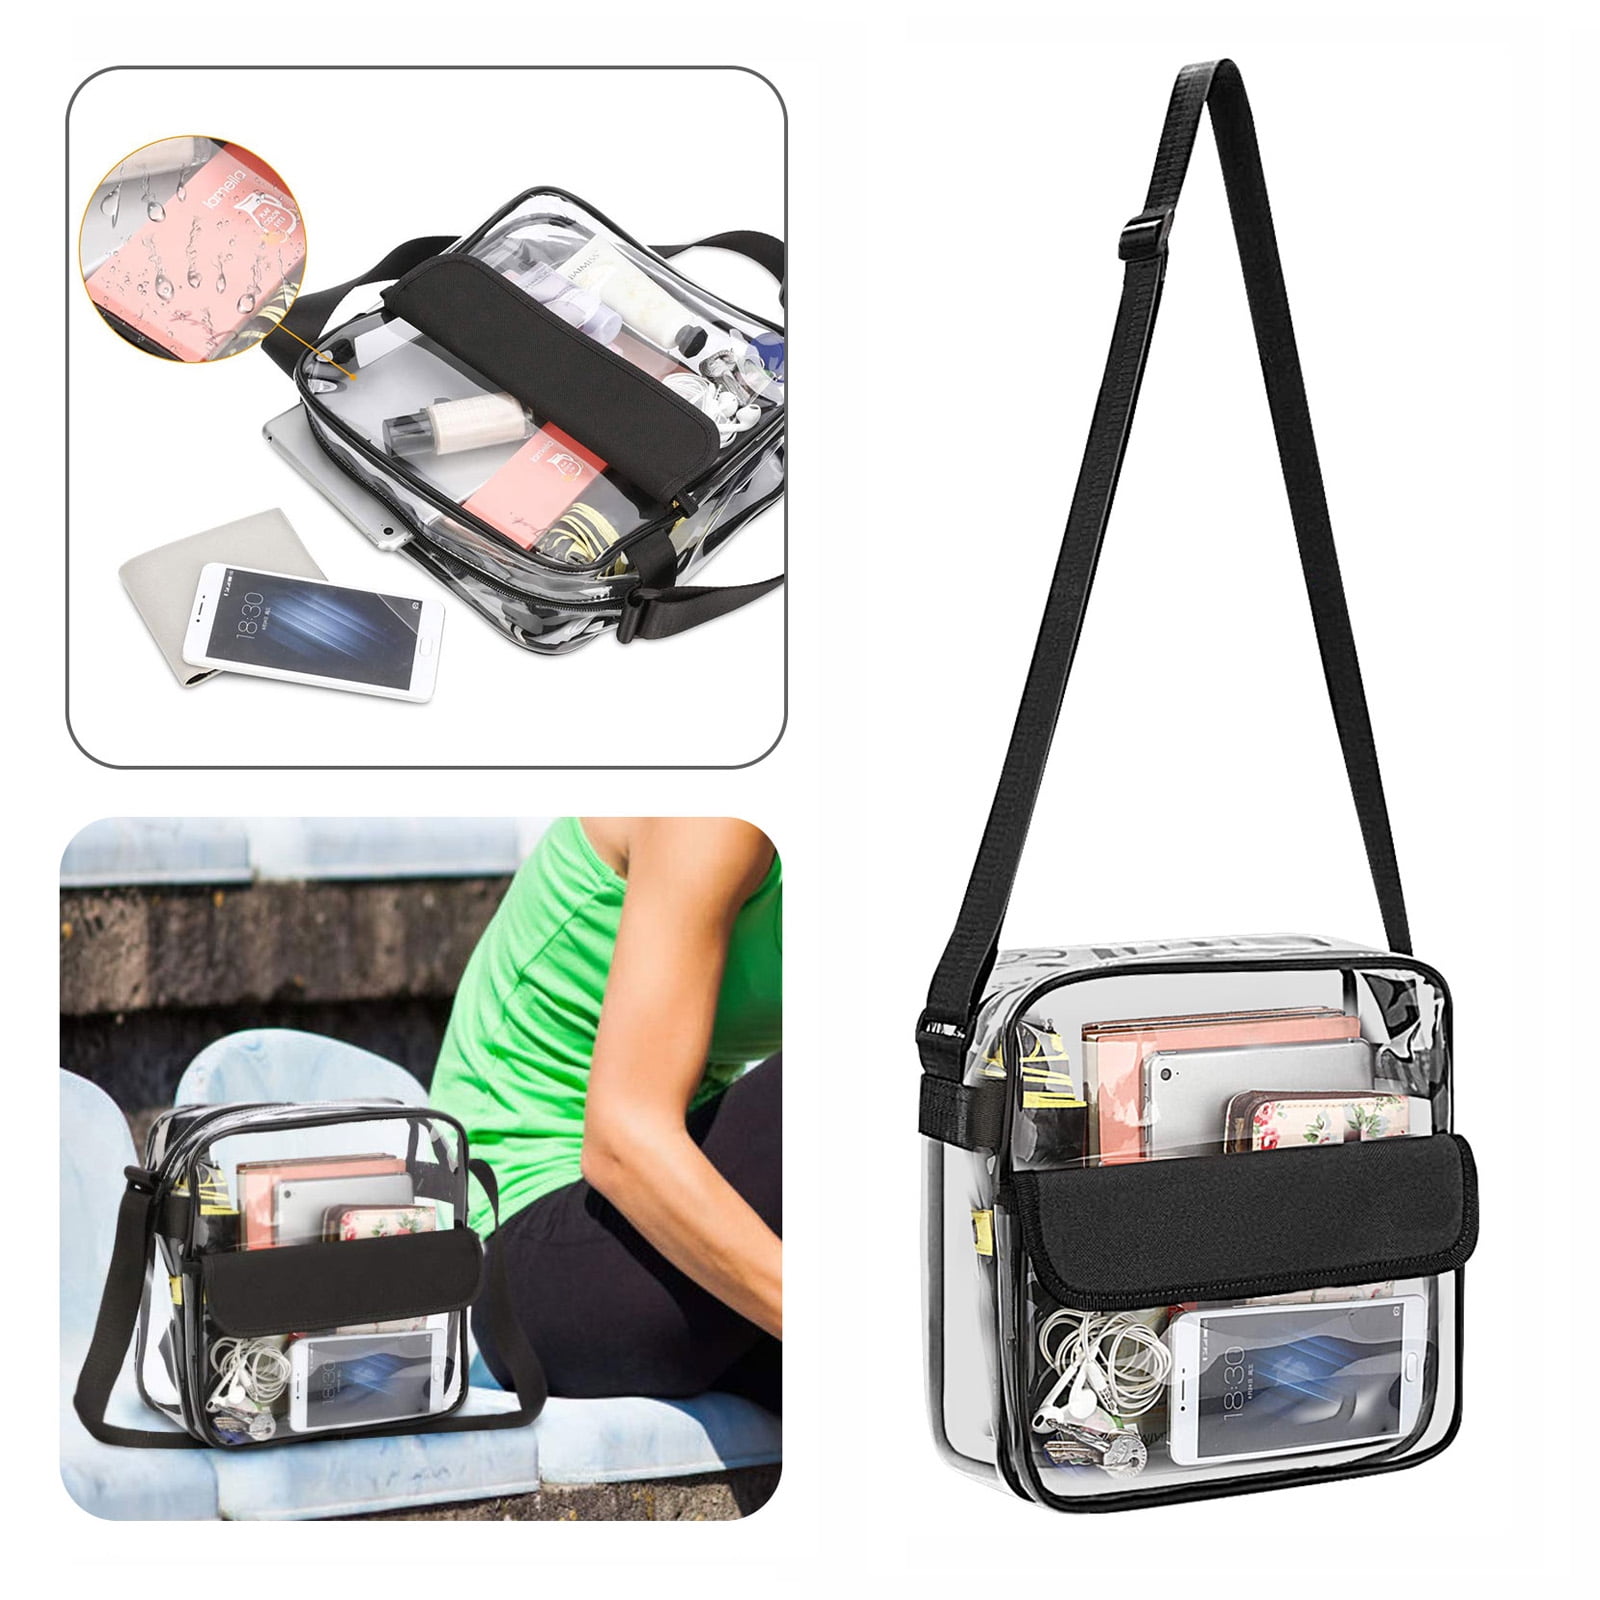 Chrees Transparent PVC Cross Body Shoulder Bags with Adjustable Shoulder Straps and Zipper Pocket Clear Bag Clear Tote Bags Clear Bags for Work Clear Stadium Bags for Women 